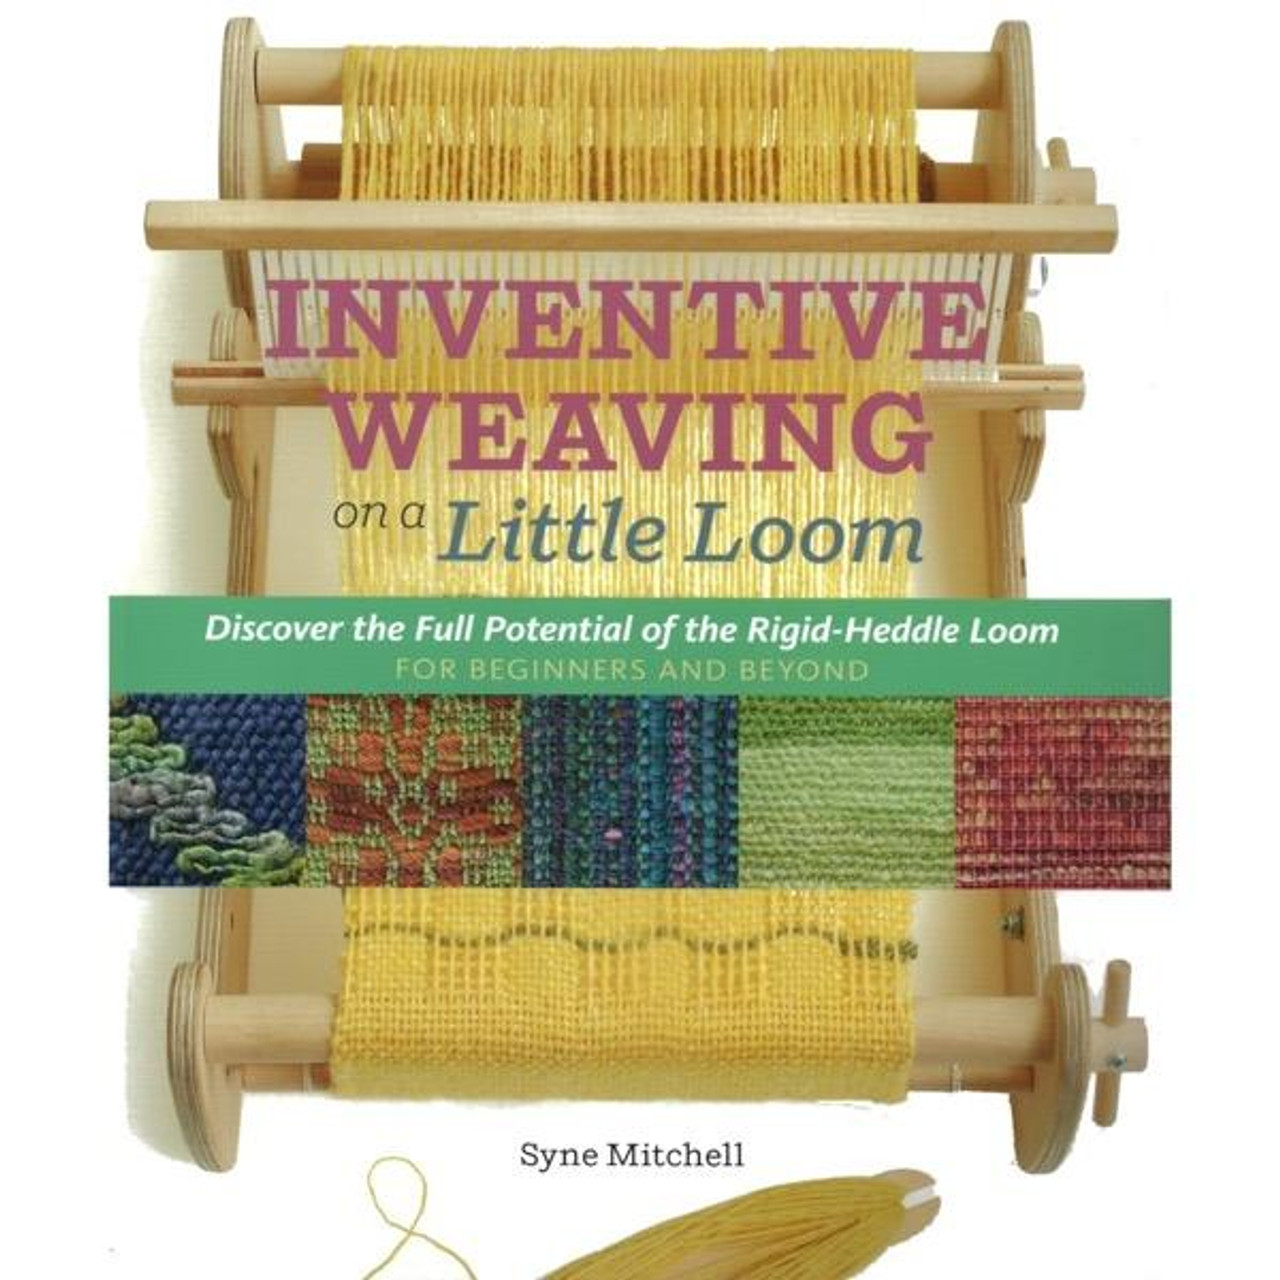 Weaving instructions - Here's how to weave with Micki's loom, Weaving Toys